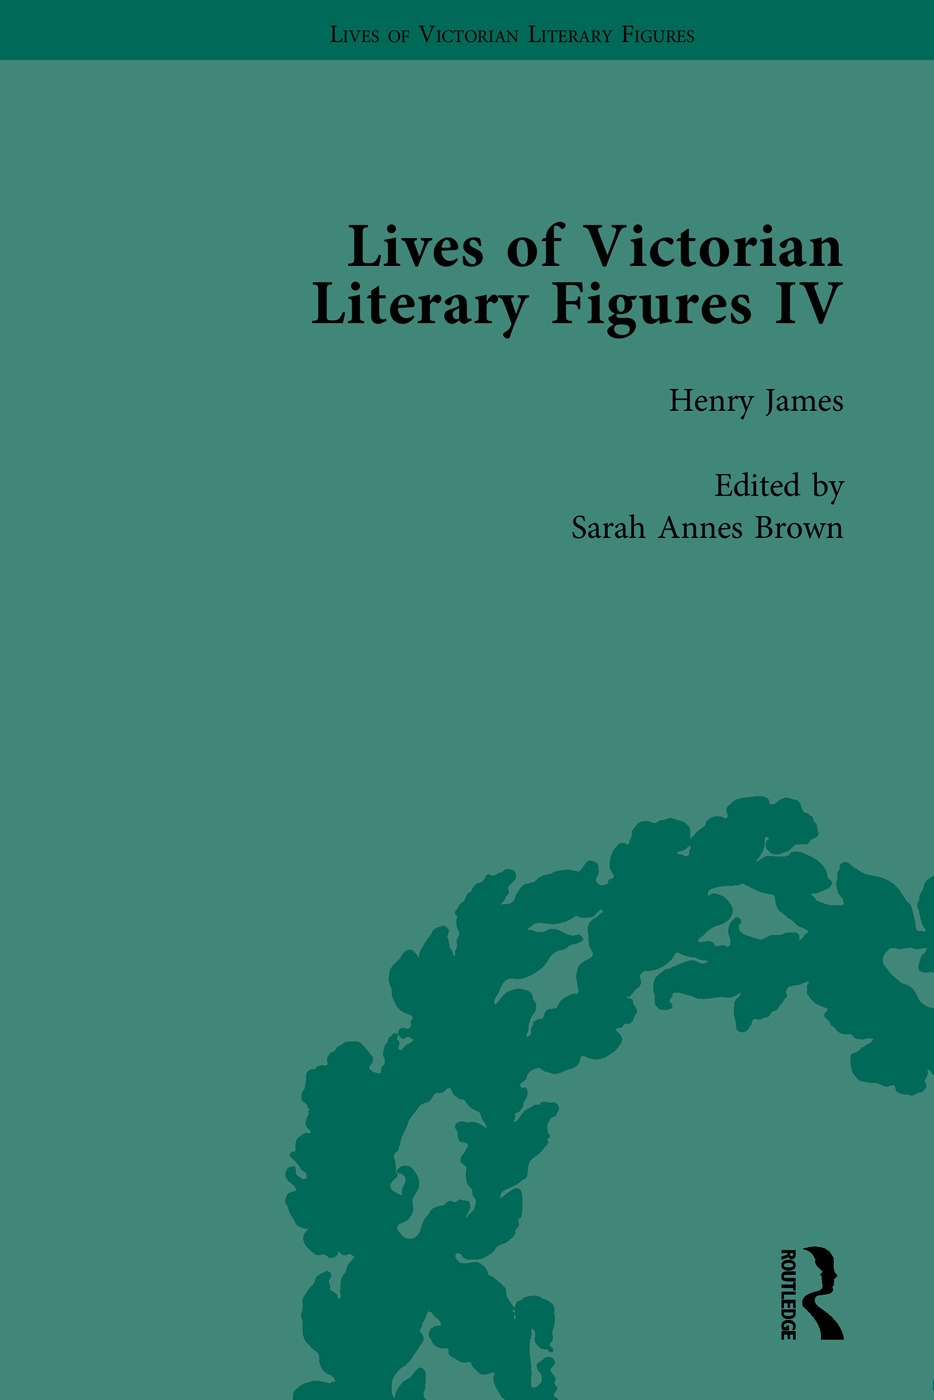 Lives of Victorian Literary Figures, Part IV: Henry James, Edith Wharton and Oscar Wilde by Their Contemporaries